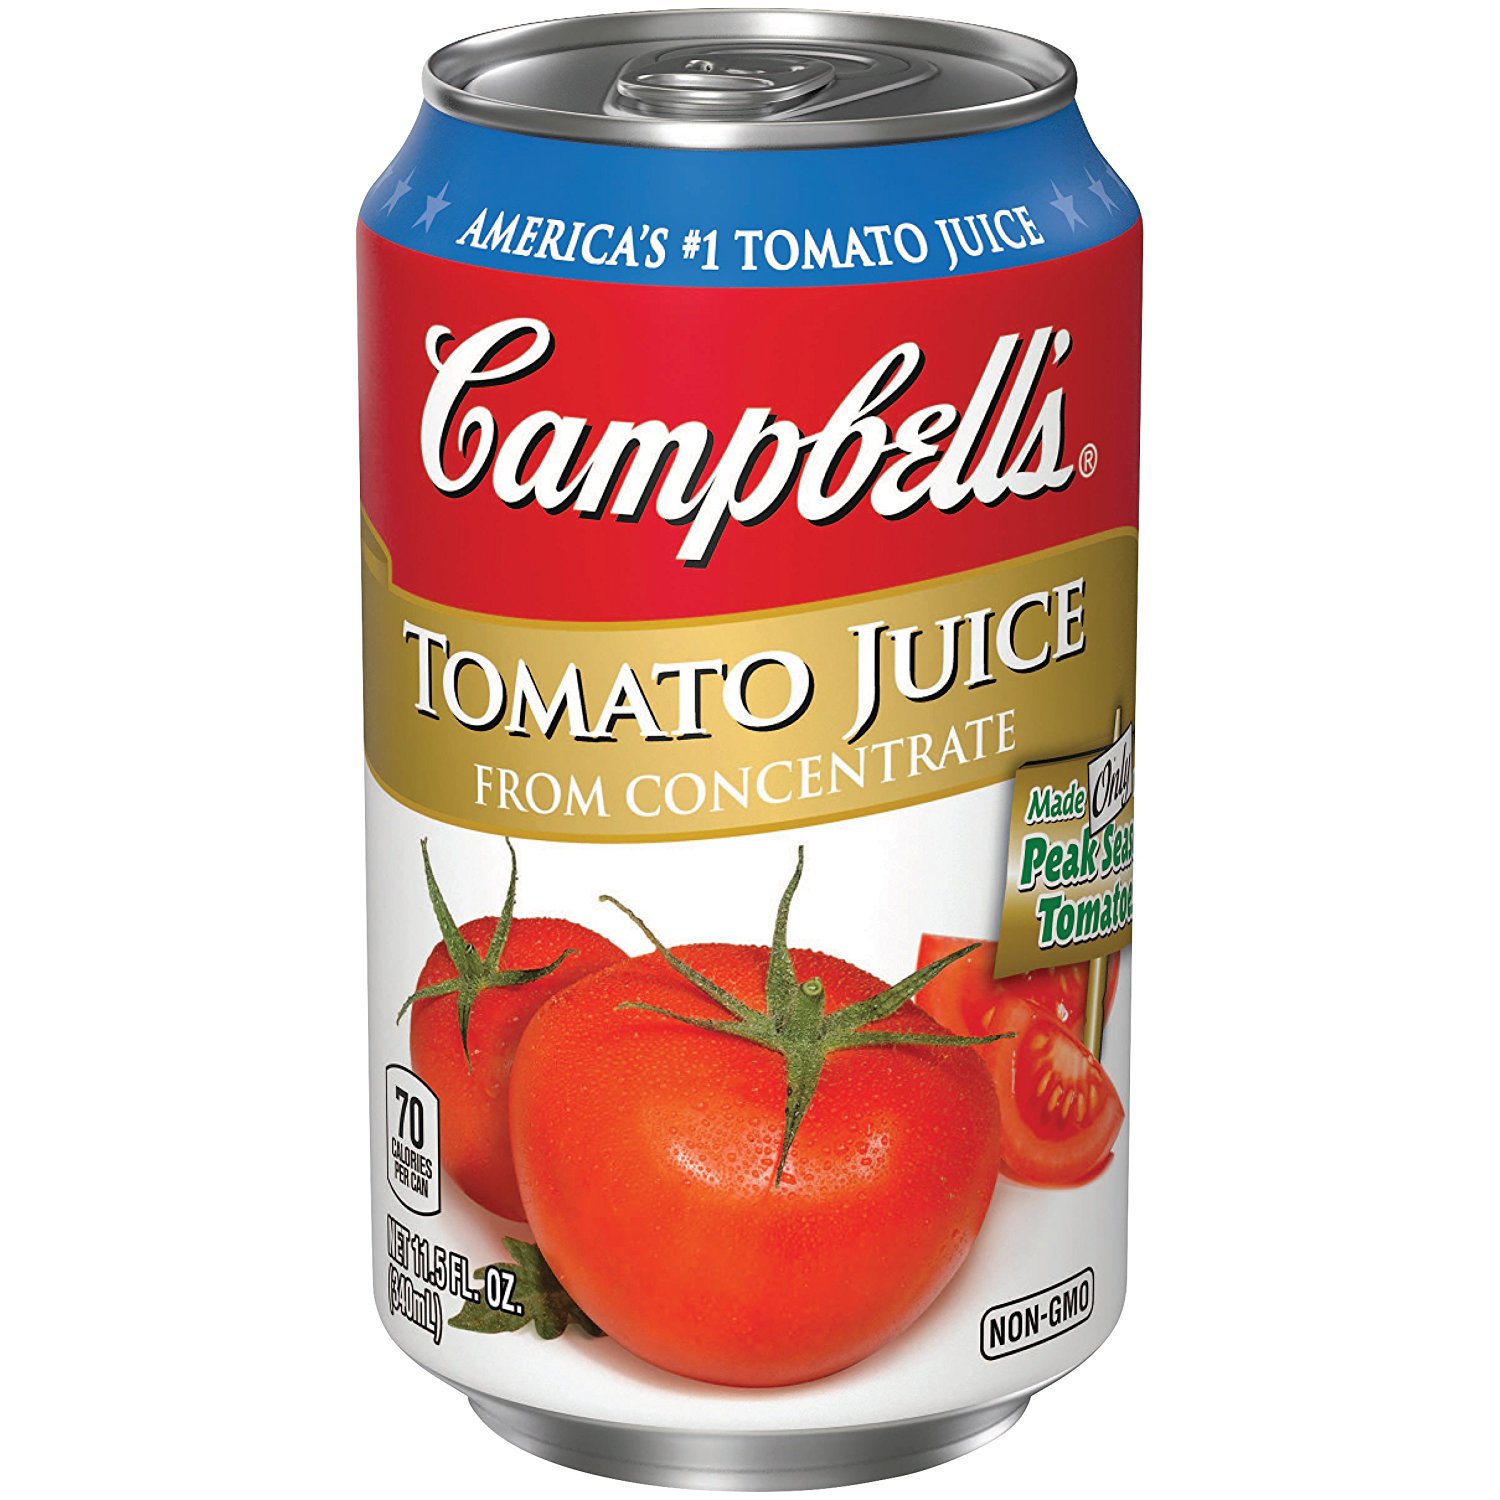 Amazon.com : Campbell's Tomato Juice, 11.5 Ounce, 24 Count ...